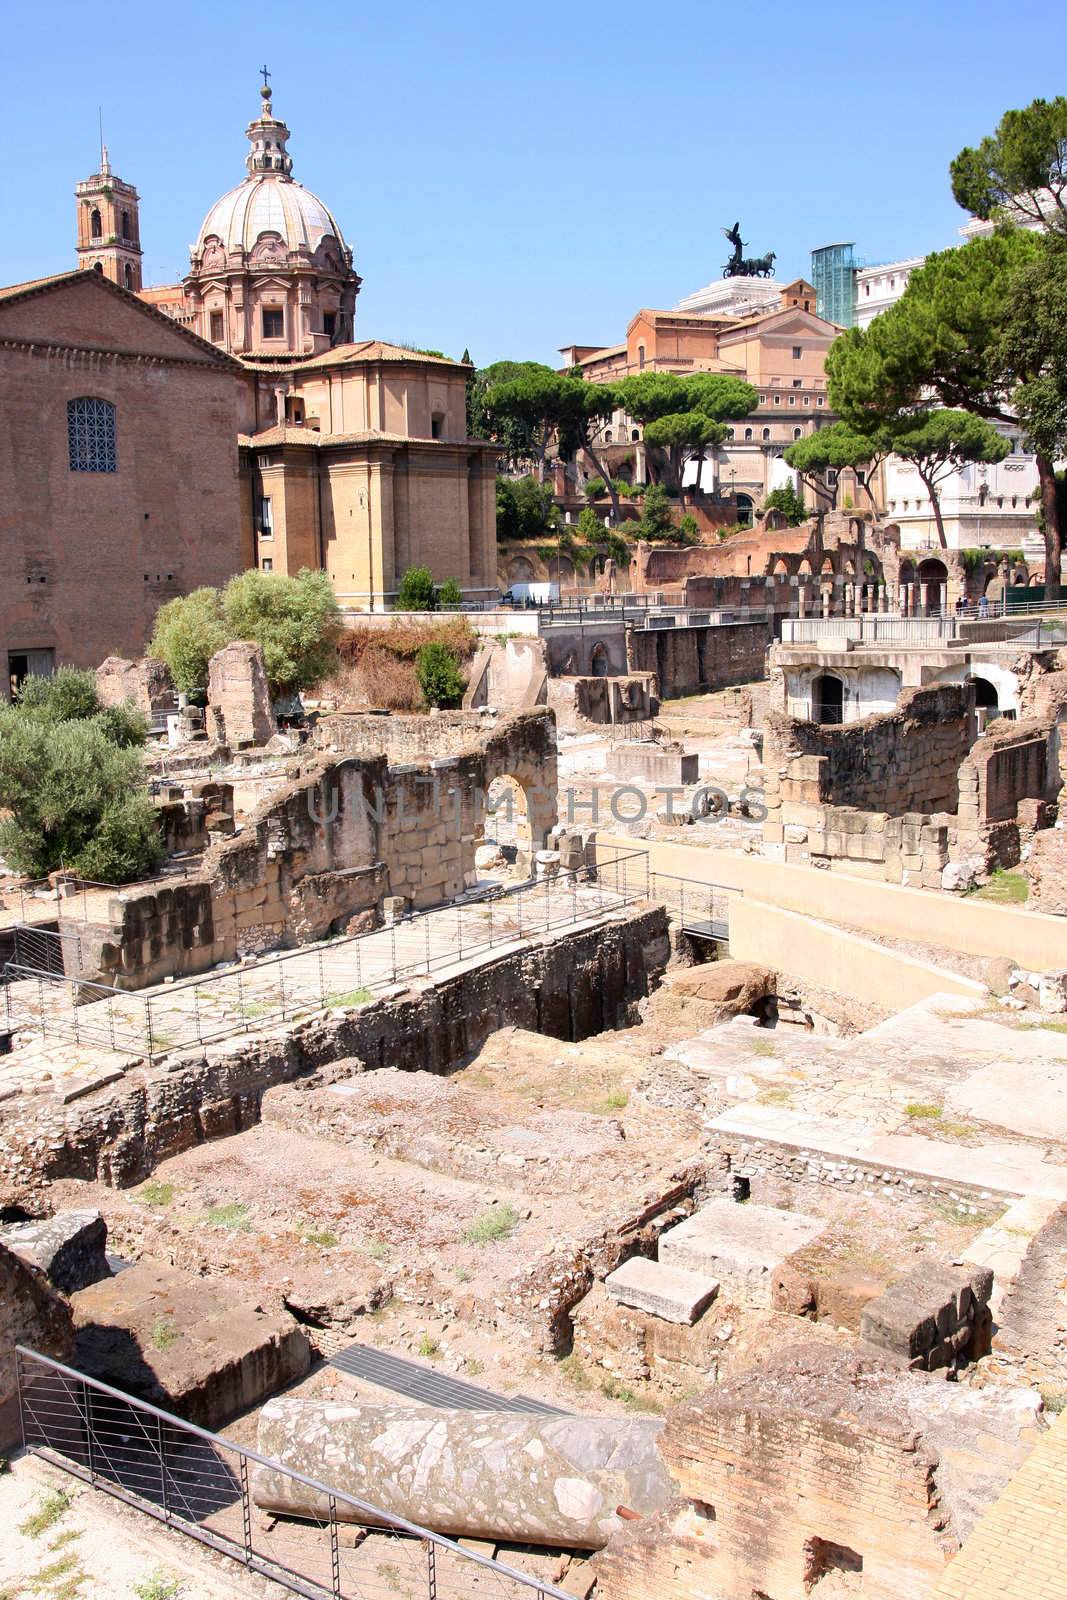 Ruins of the Roman Forum, in Rome, Italy